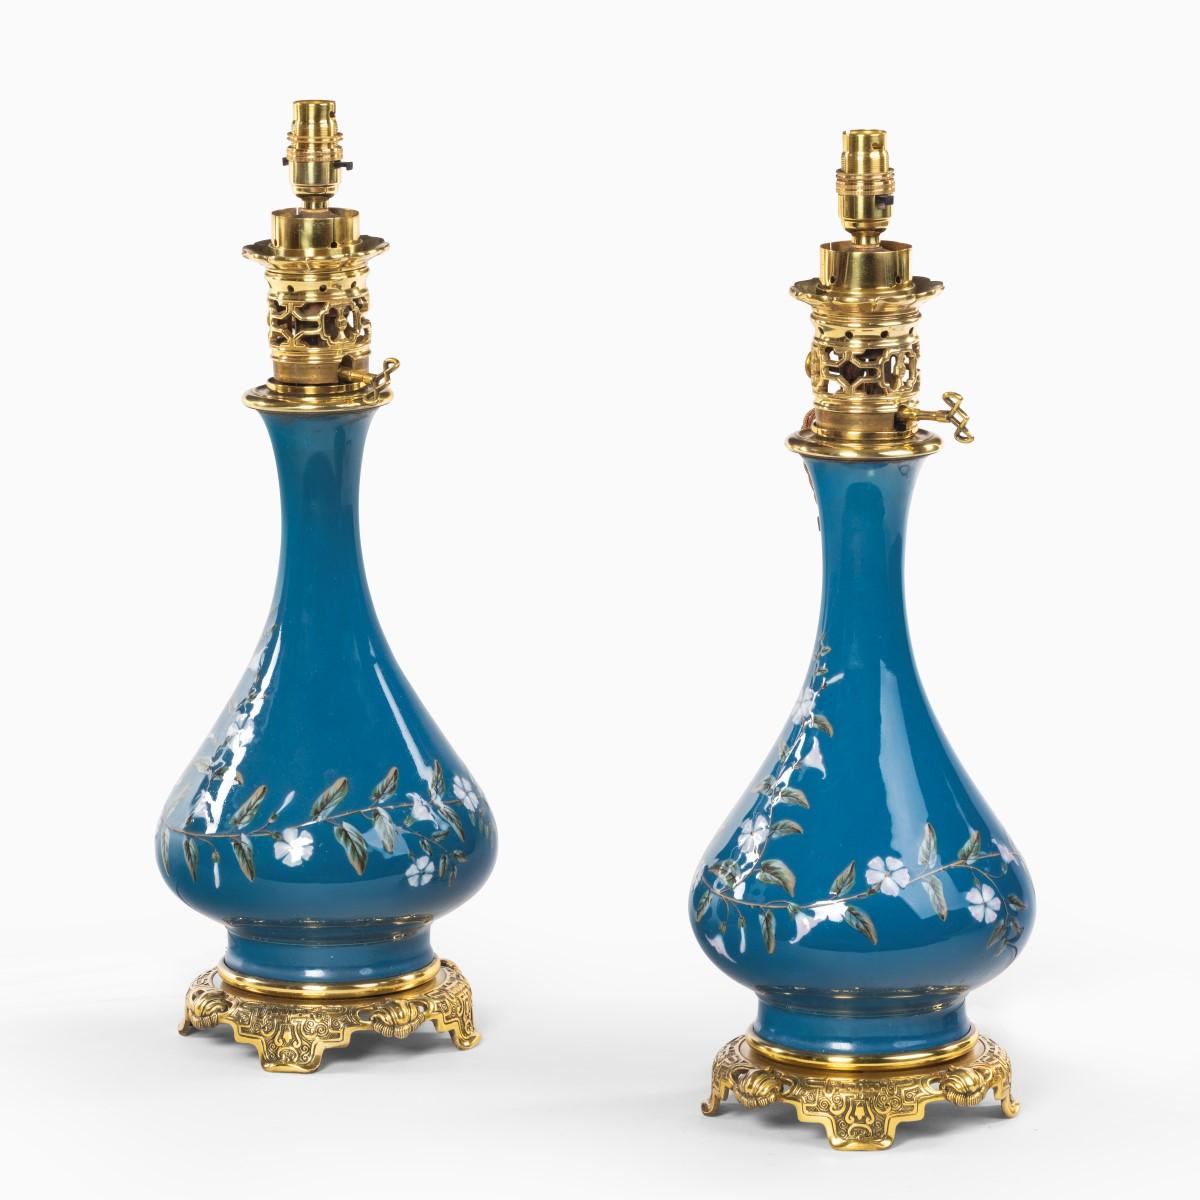 A pair of French pate-sur-pate ceramic oil lamps, of globular form with applied white flowers and leafy tendrils on a blue ground, with high quality ormolu mounts in the Chinoiserie style, now converted to electricity, Circa 1890.

  